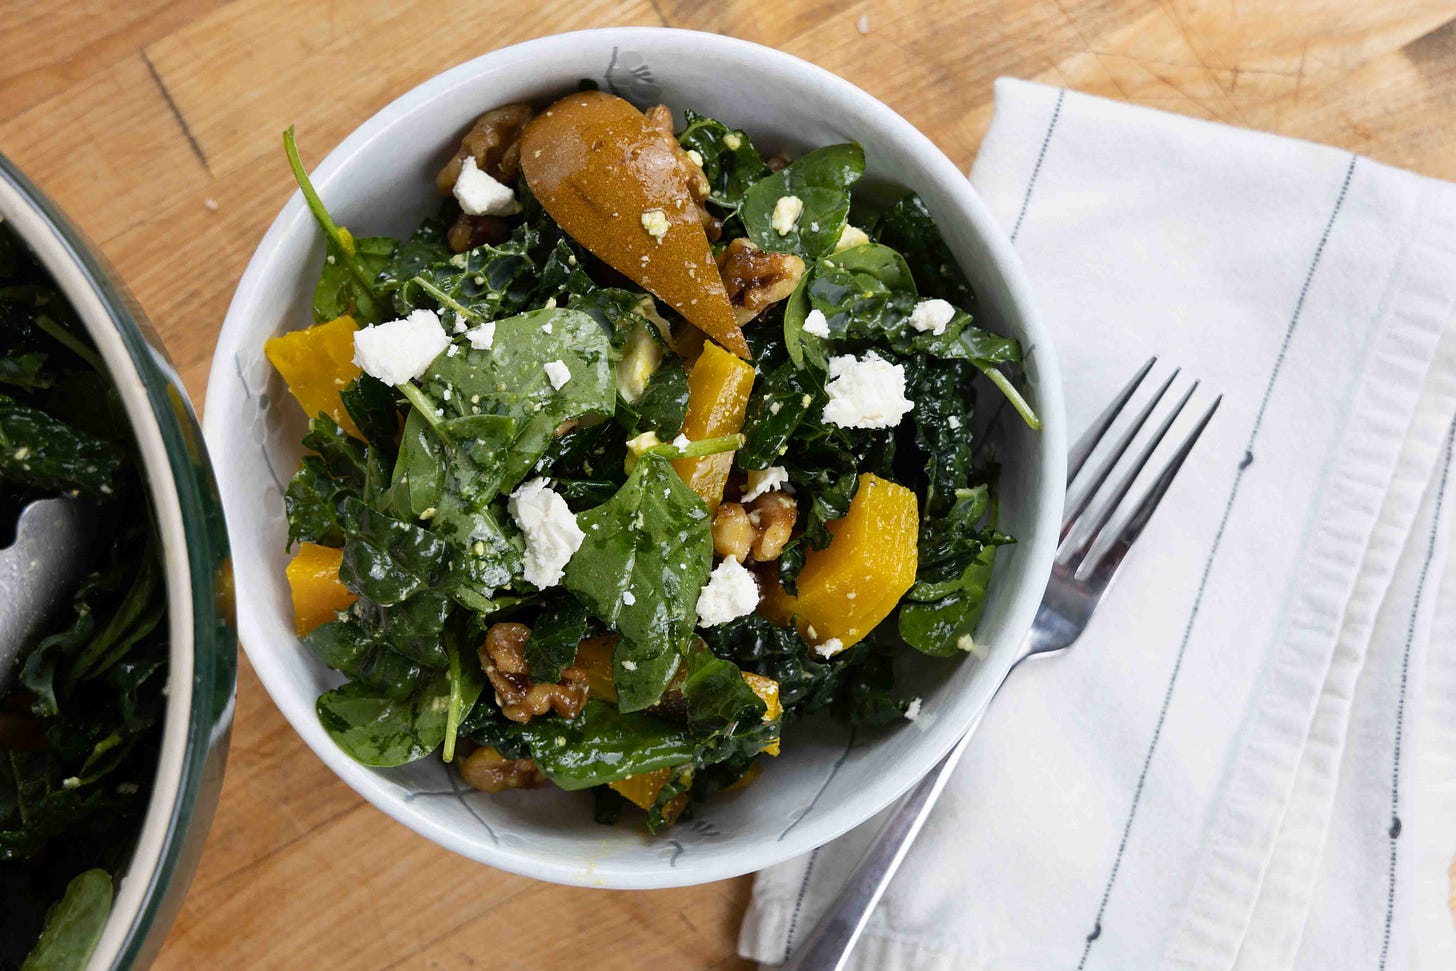 beet salad with kale and feta cheese